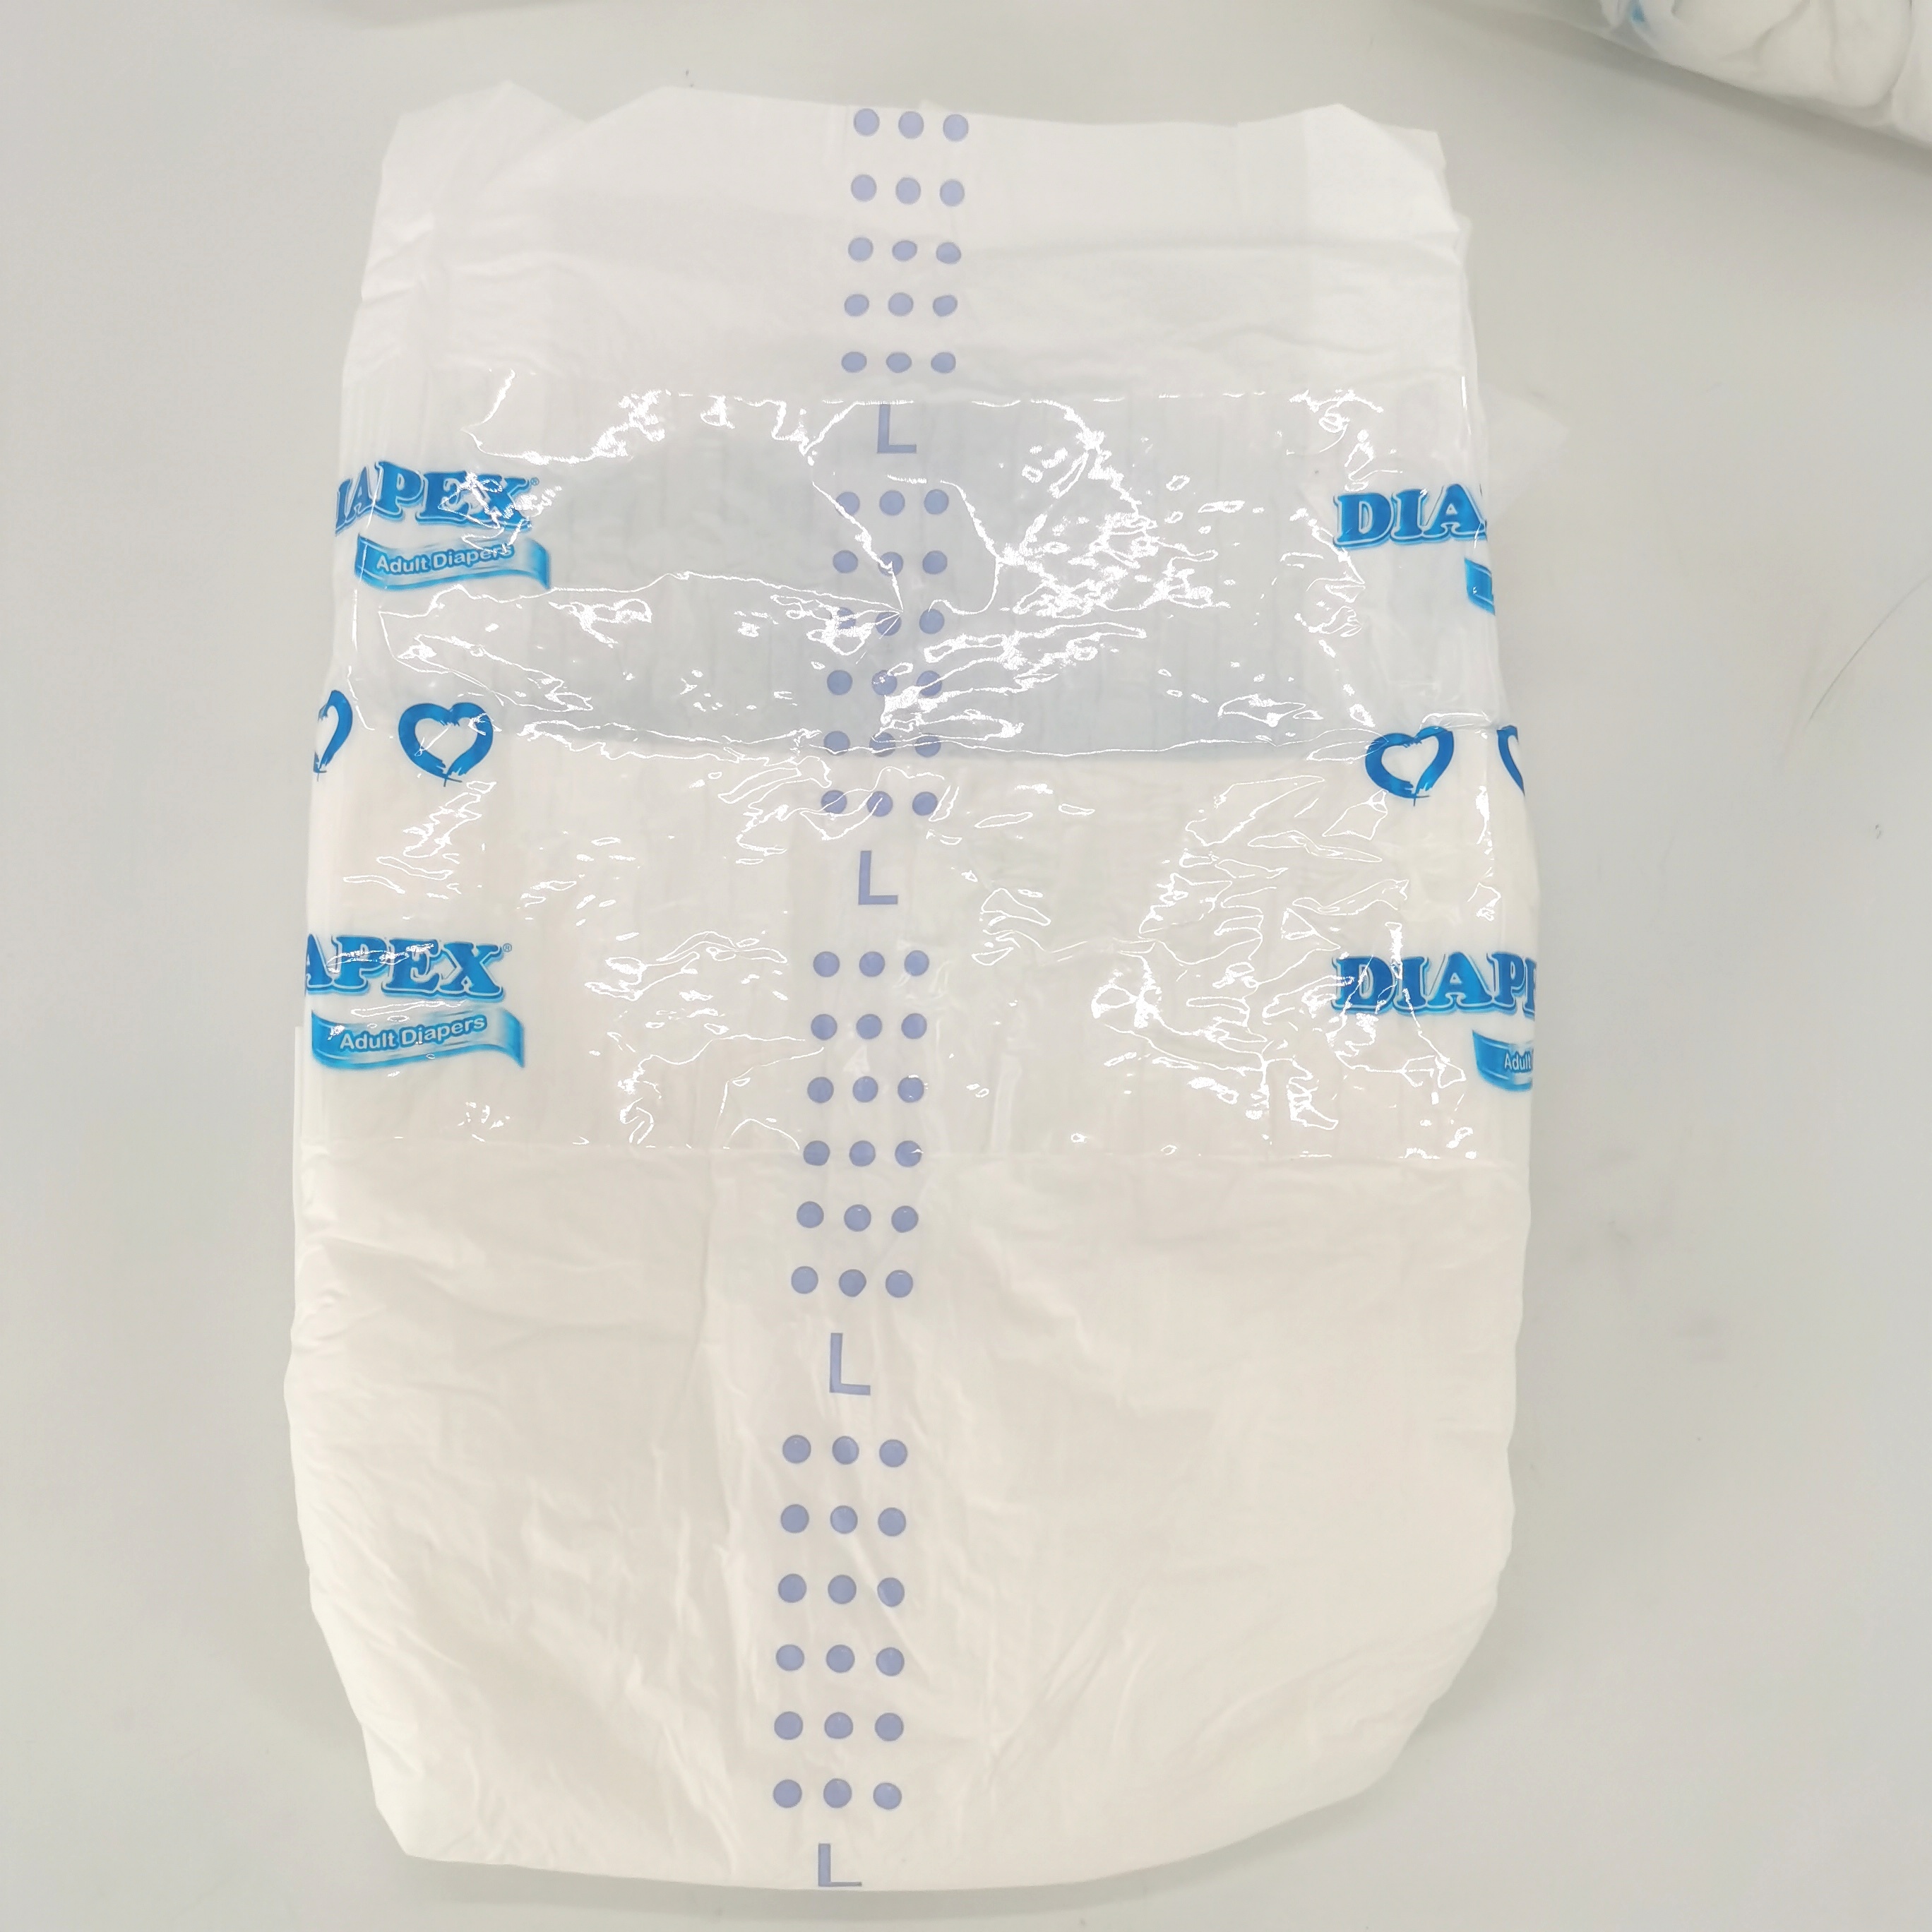 0lder diaper OEM ODM acceptable Factory directly Adult diaper